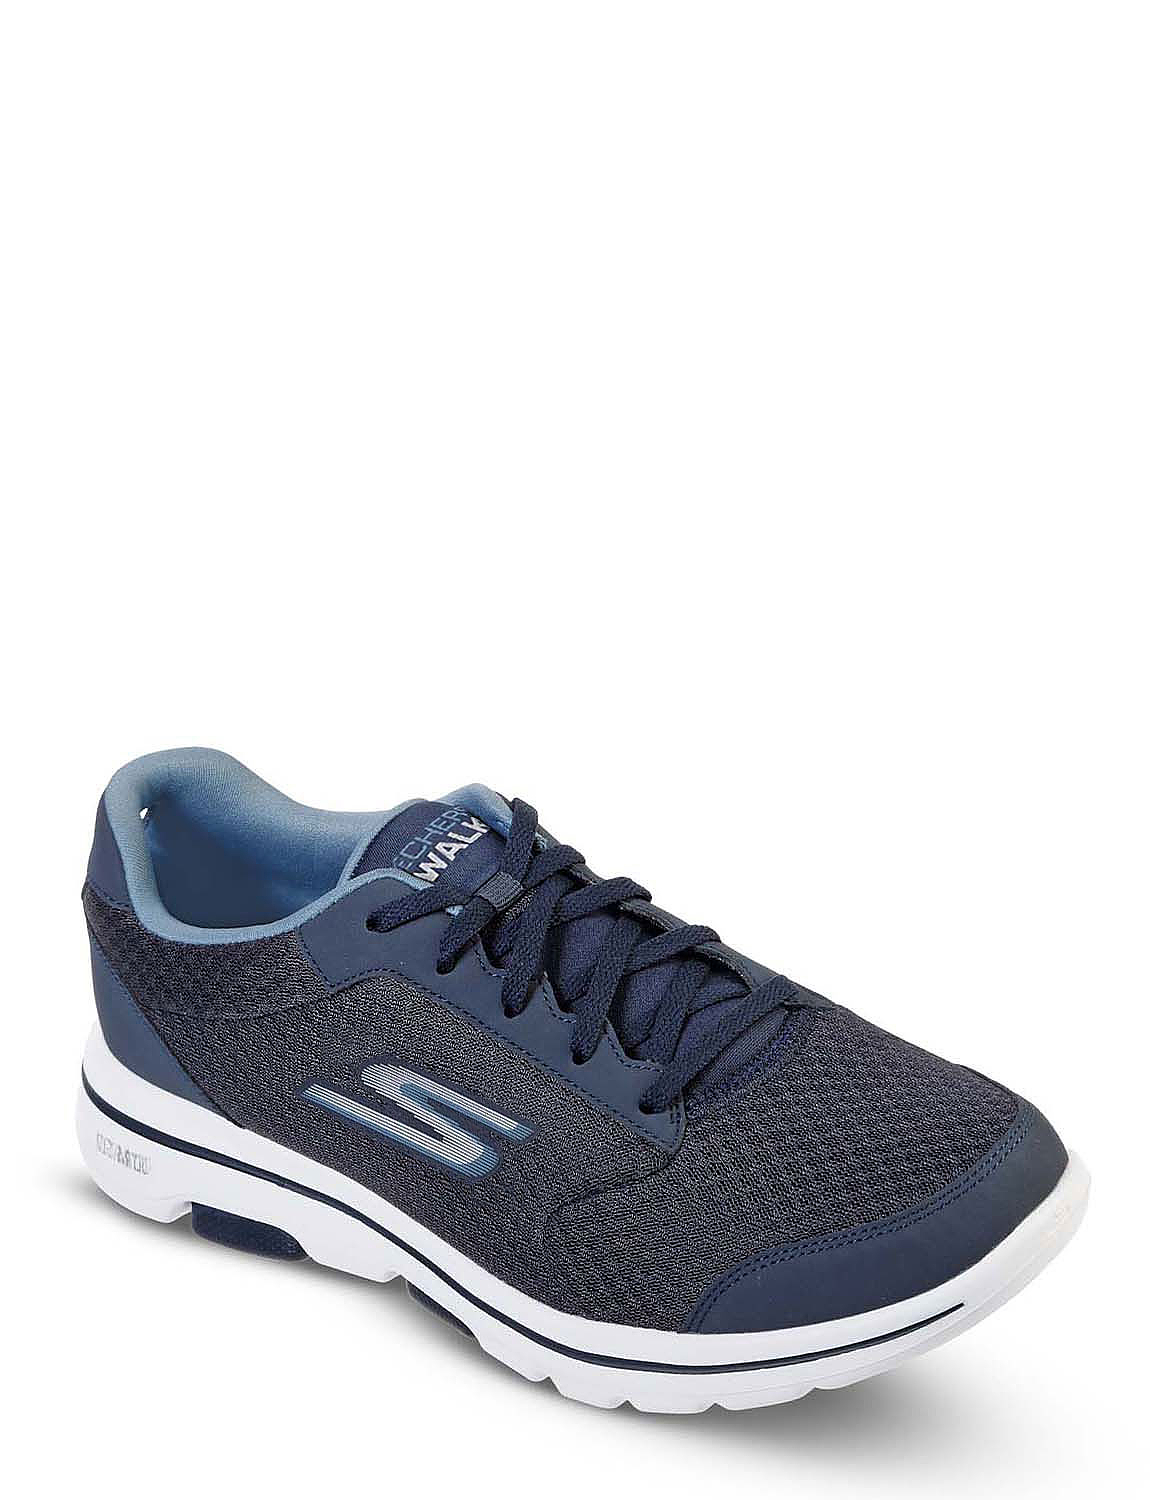 Skechers 5 Qualify Extra Wide Lace Up Trainer | Chums